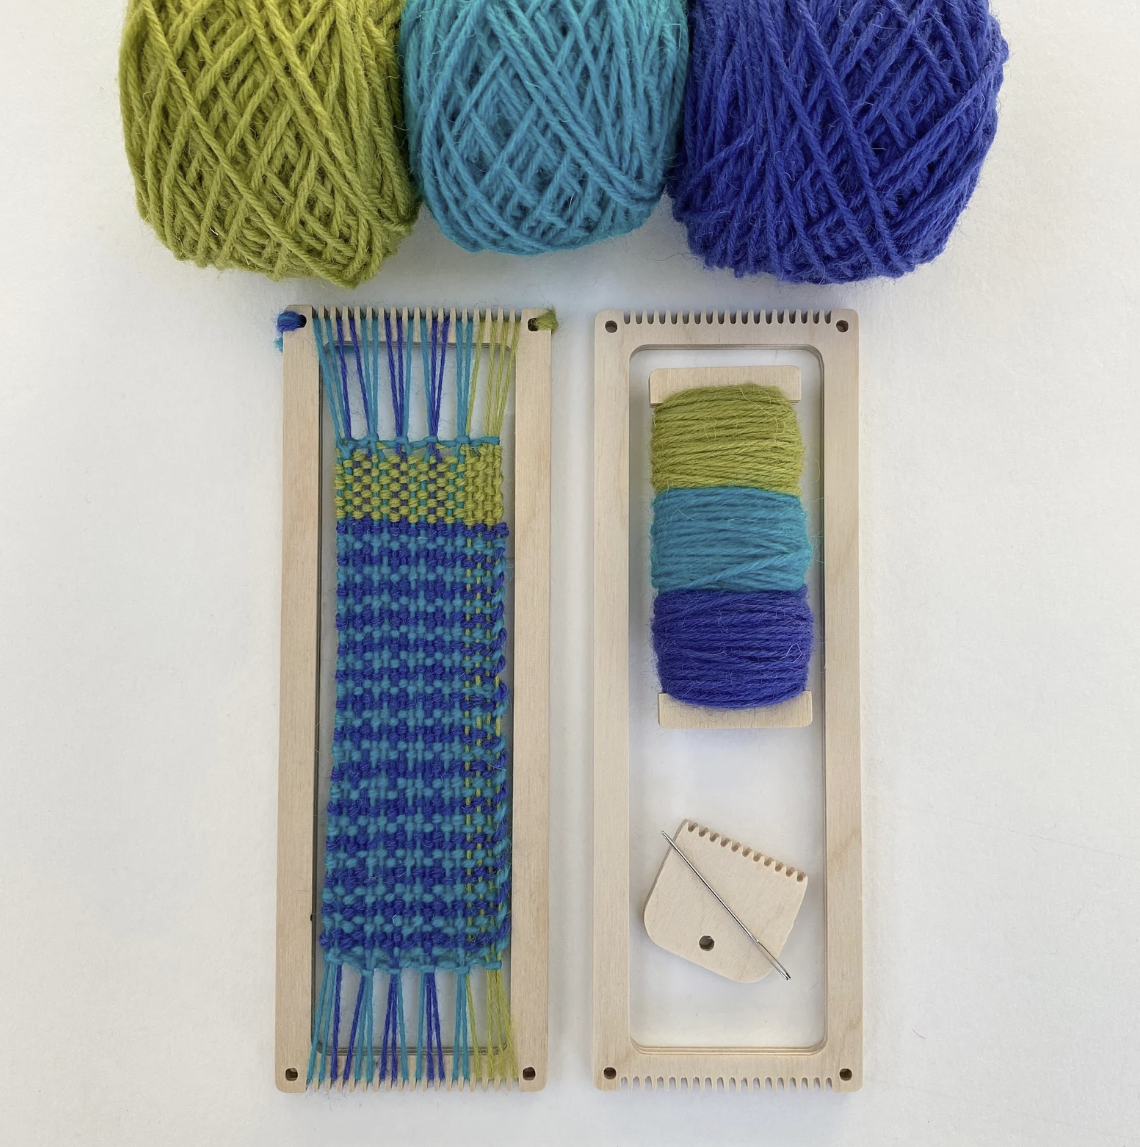 Miniature rectangular wooden loom for making fabric bookmarks, featuring green, teal, and blue yarn. 